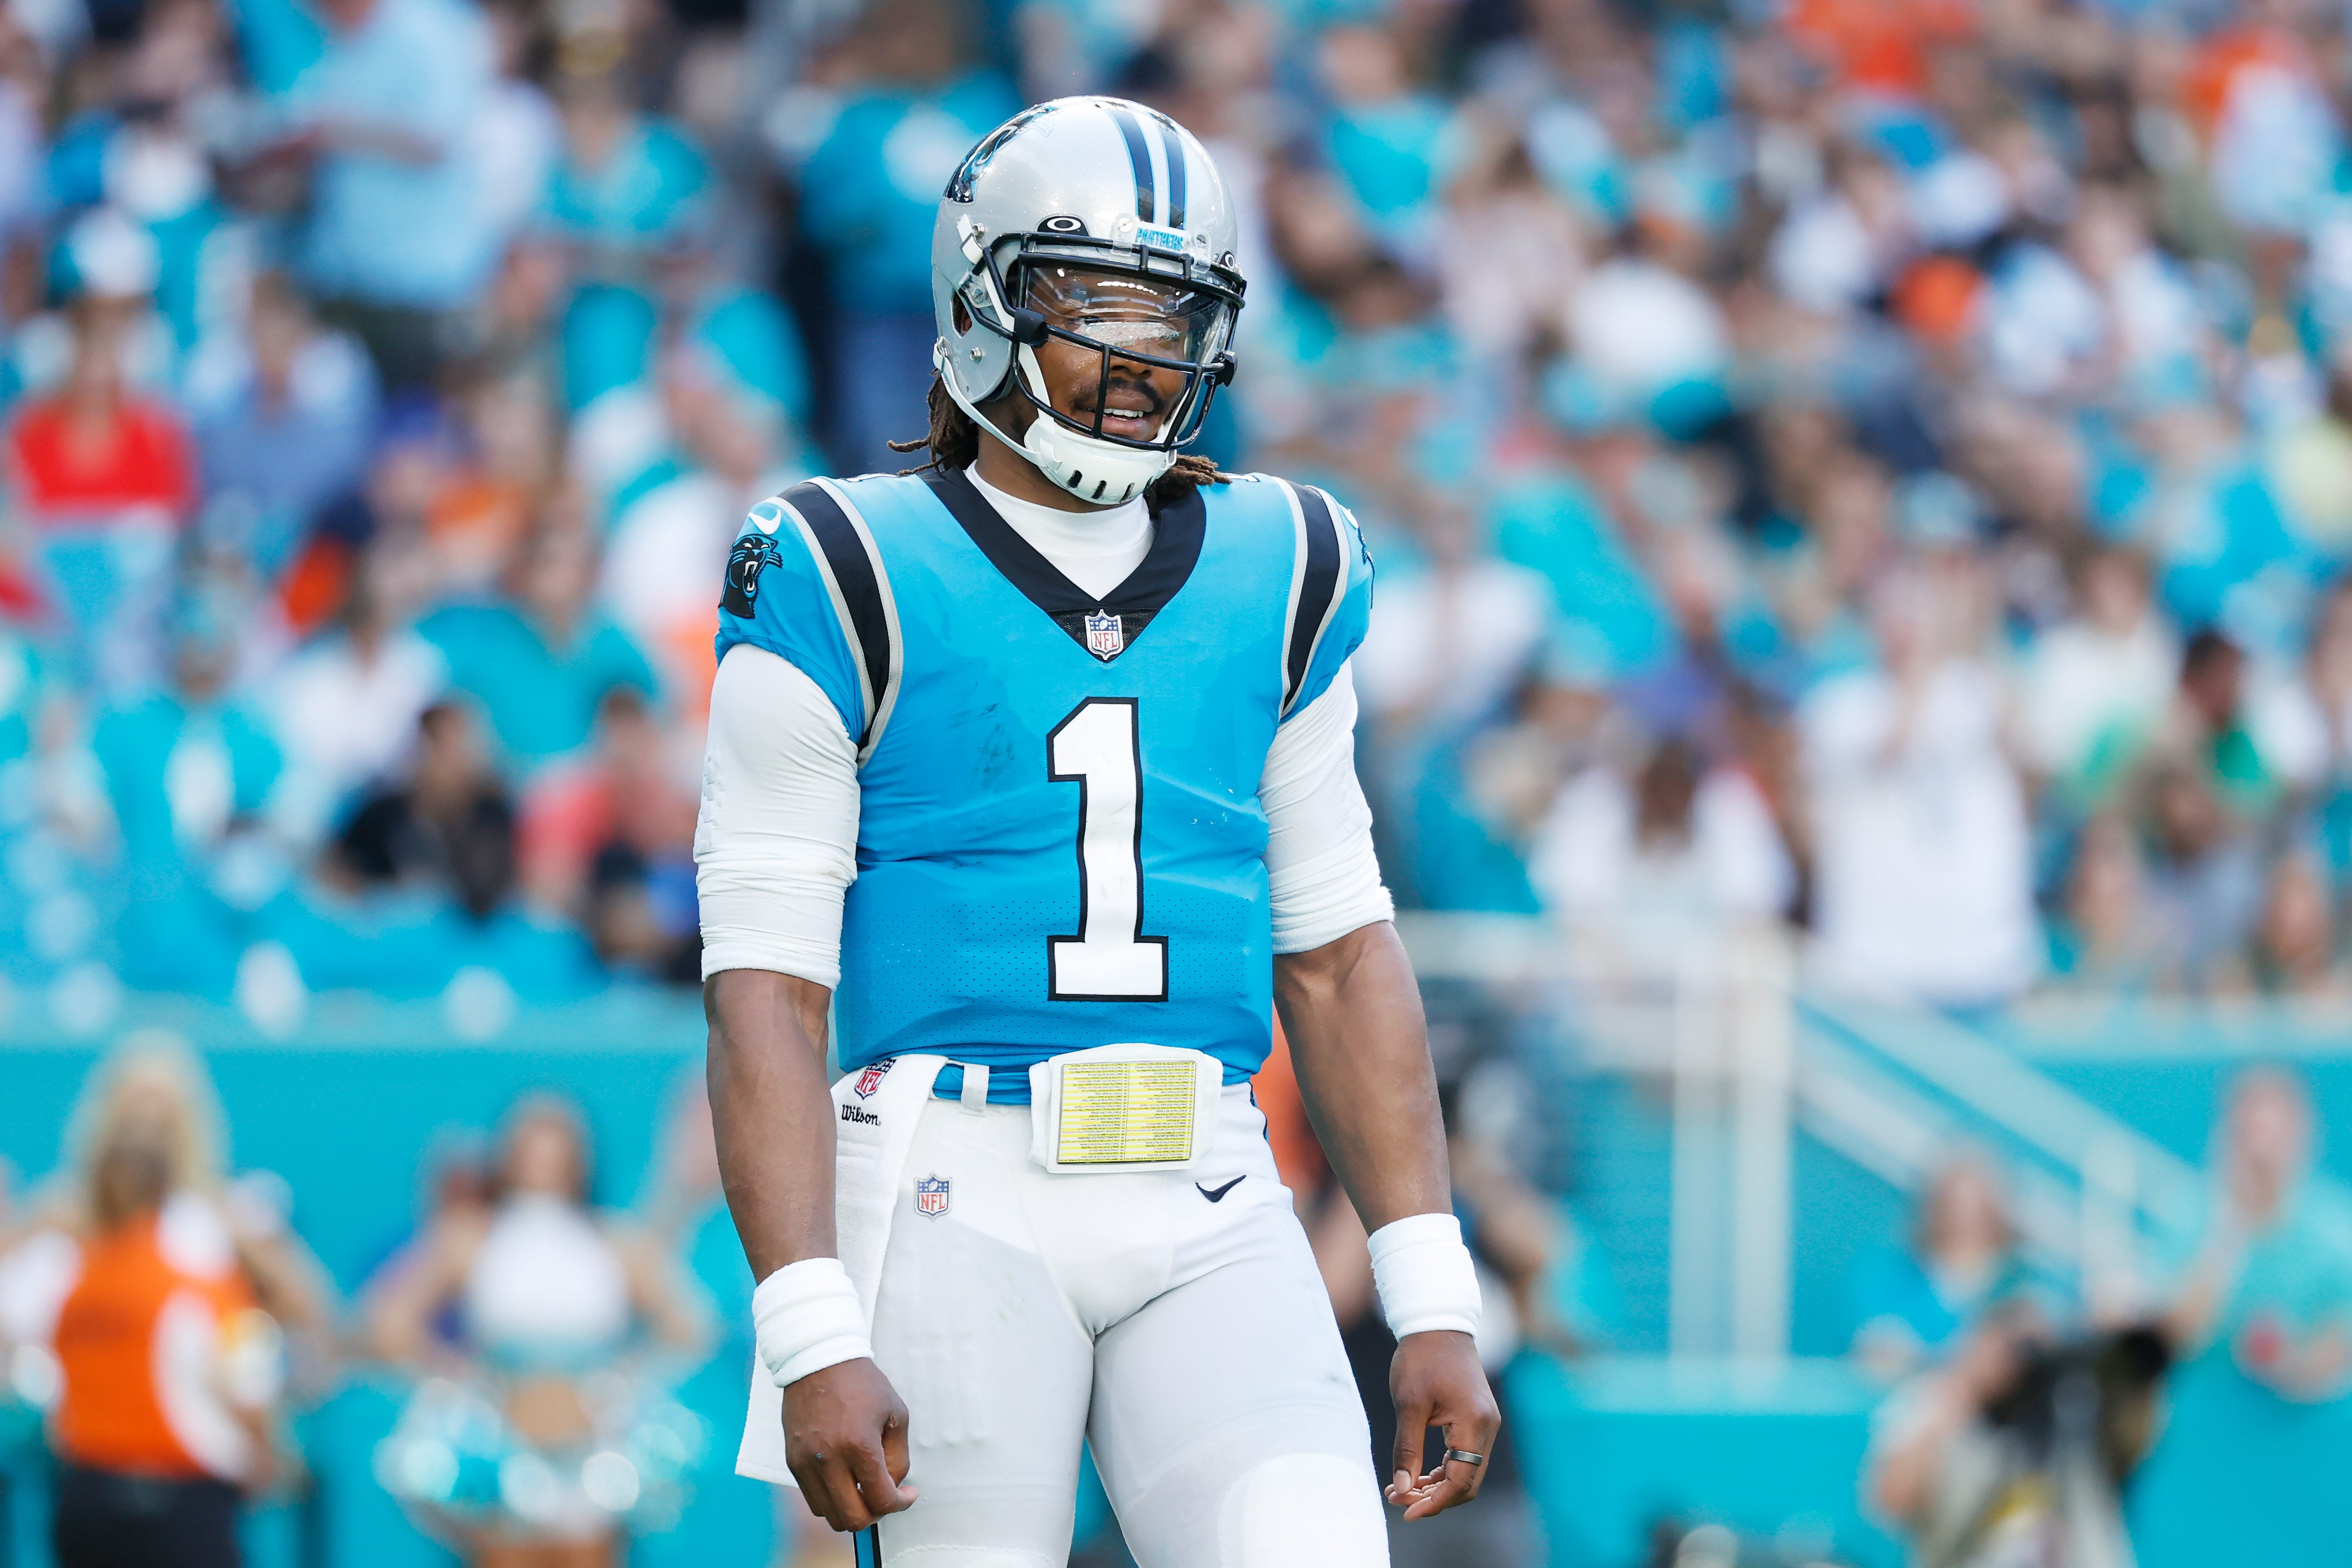 Peter King believes the Panthers will move on from Cam Newton after 2021.